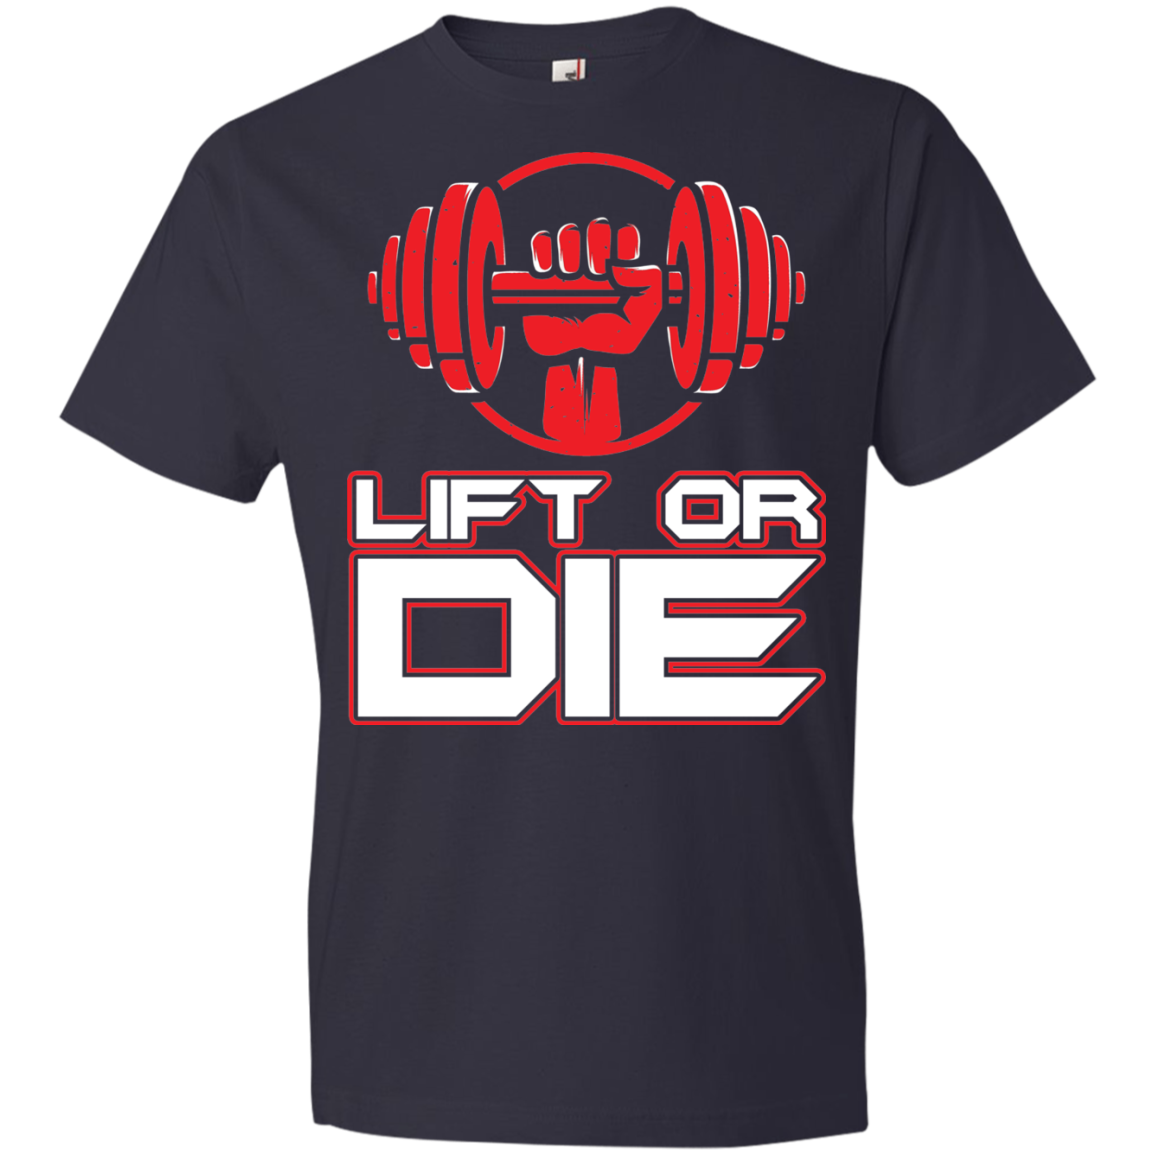 Lift or Die Fitness T-Shirt 4.5 oz